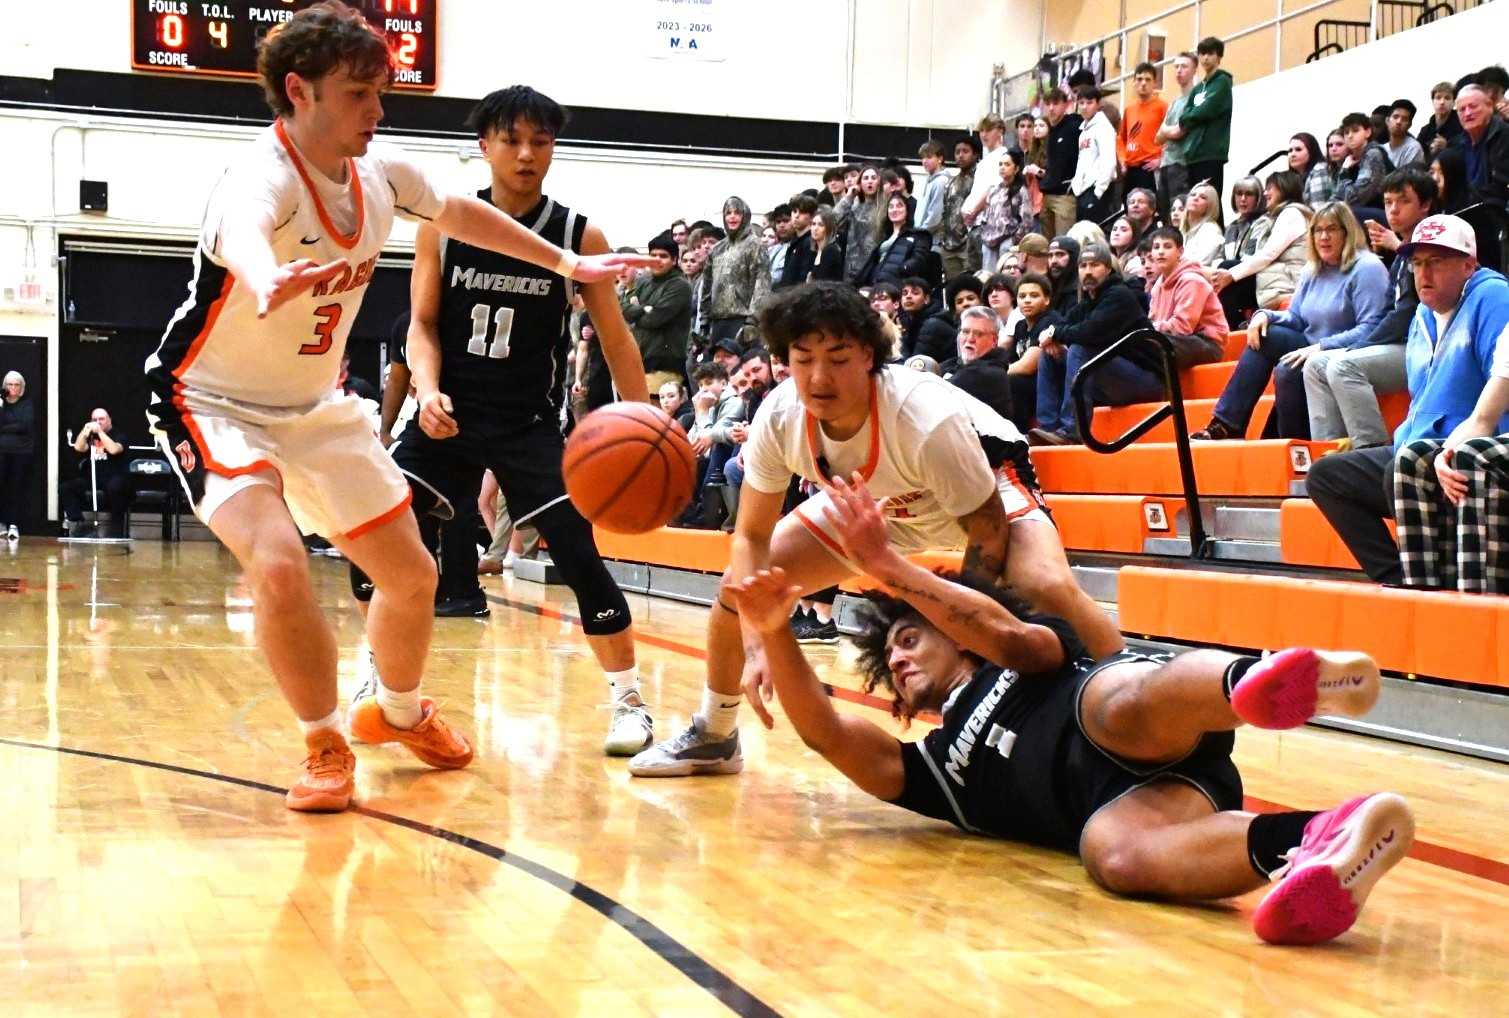 Mountainside and Sprague players scramble for the ball in Tuesday night's 6A first-round game. (Photo by Jeremy McDonald)